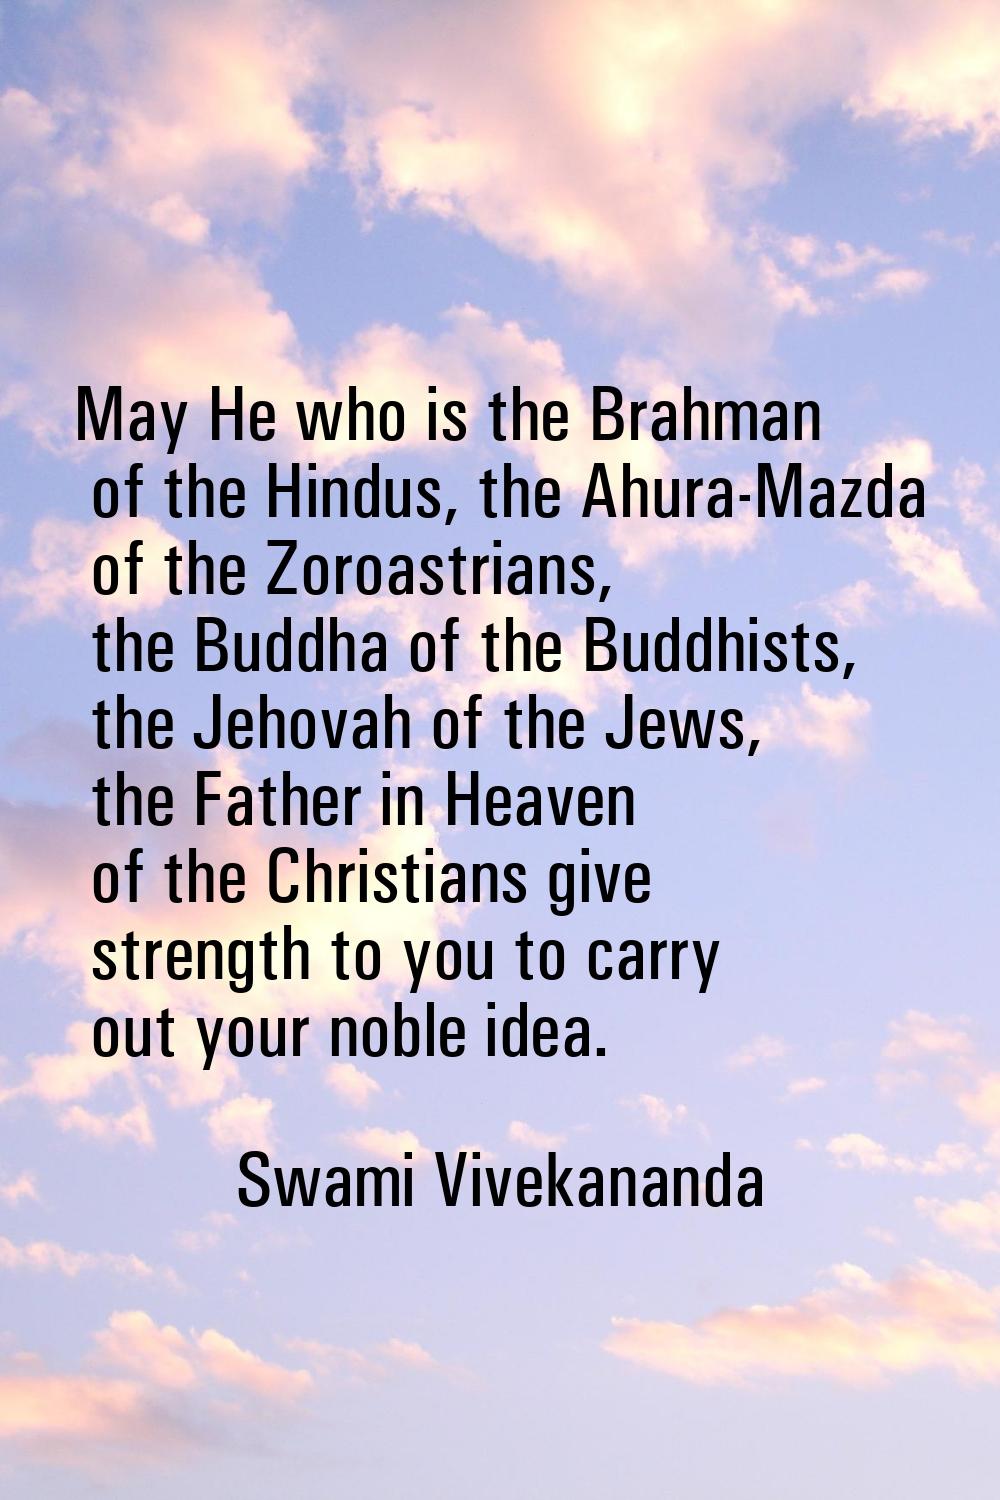 May He who is the Brahman of the Hindus, the Ahura-Mazda of the Zoroastrians, the Buddha of the Bud